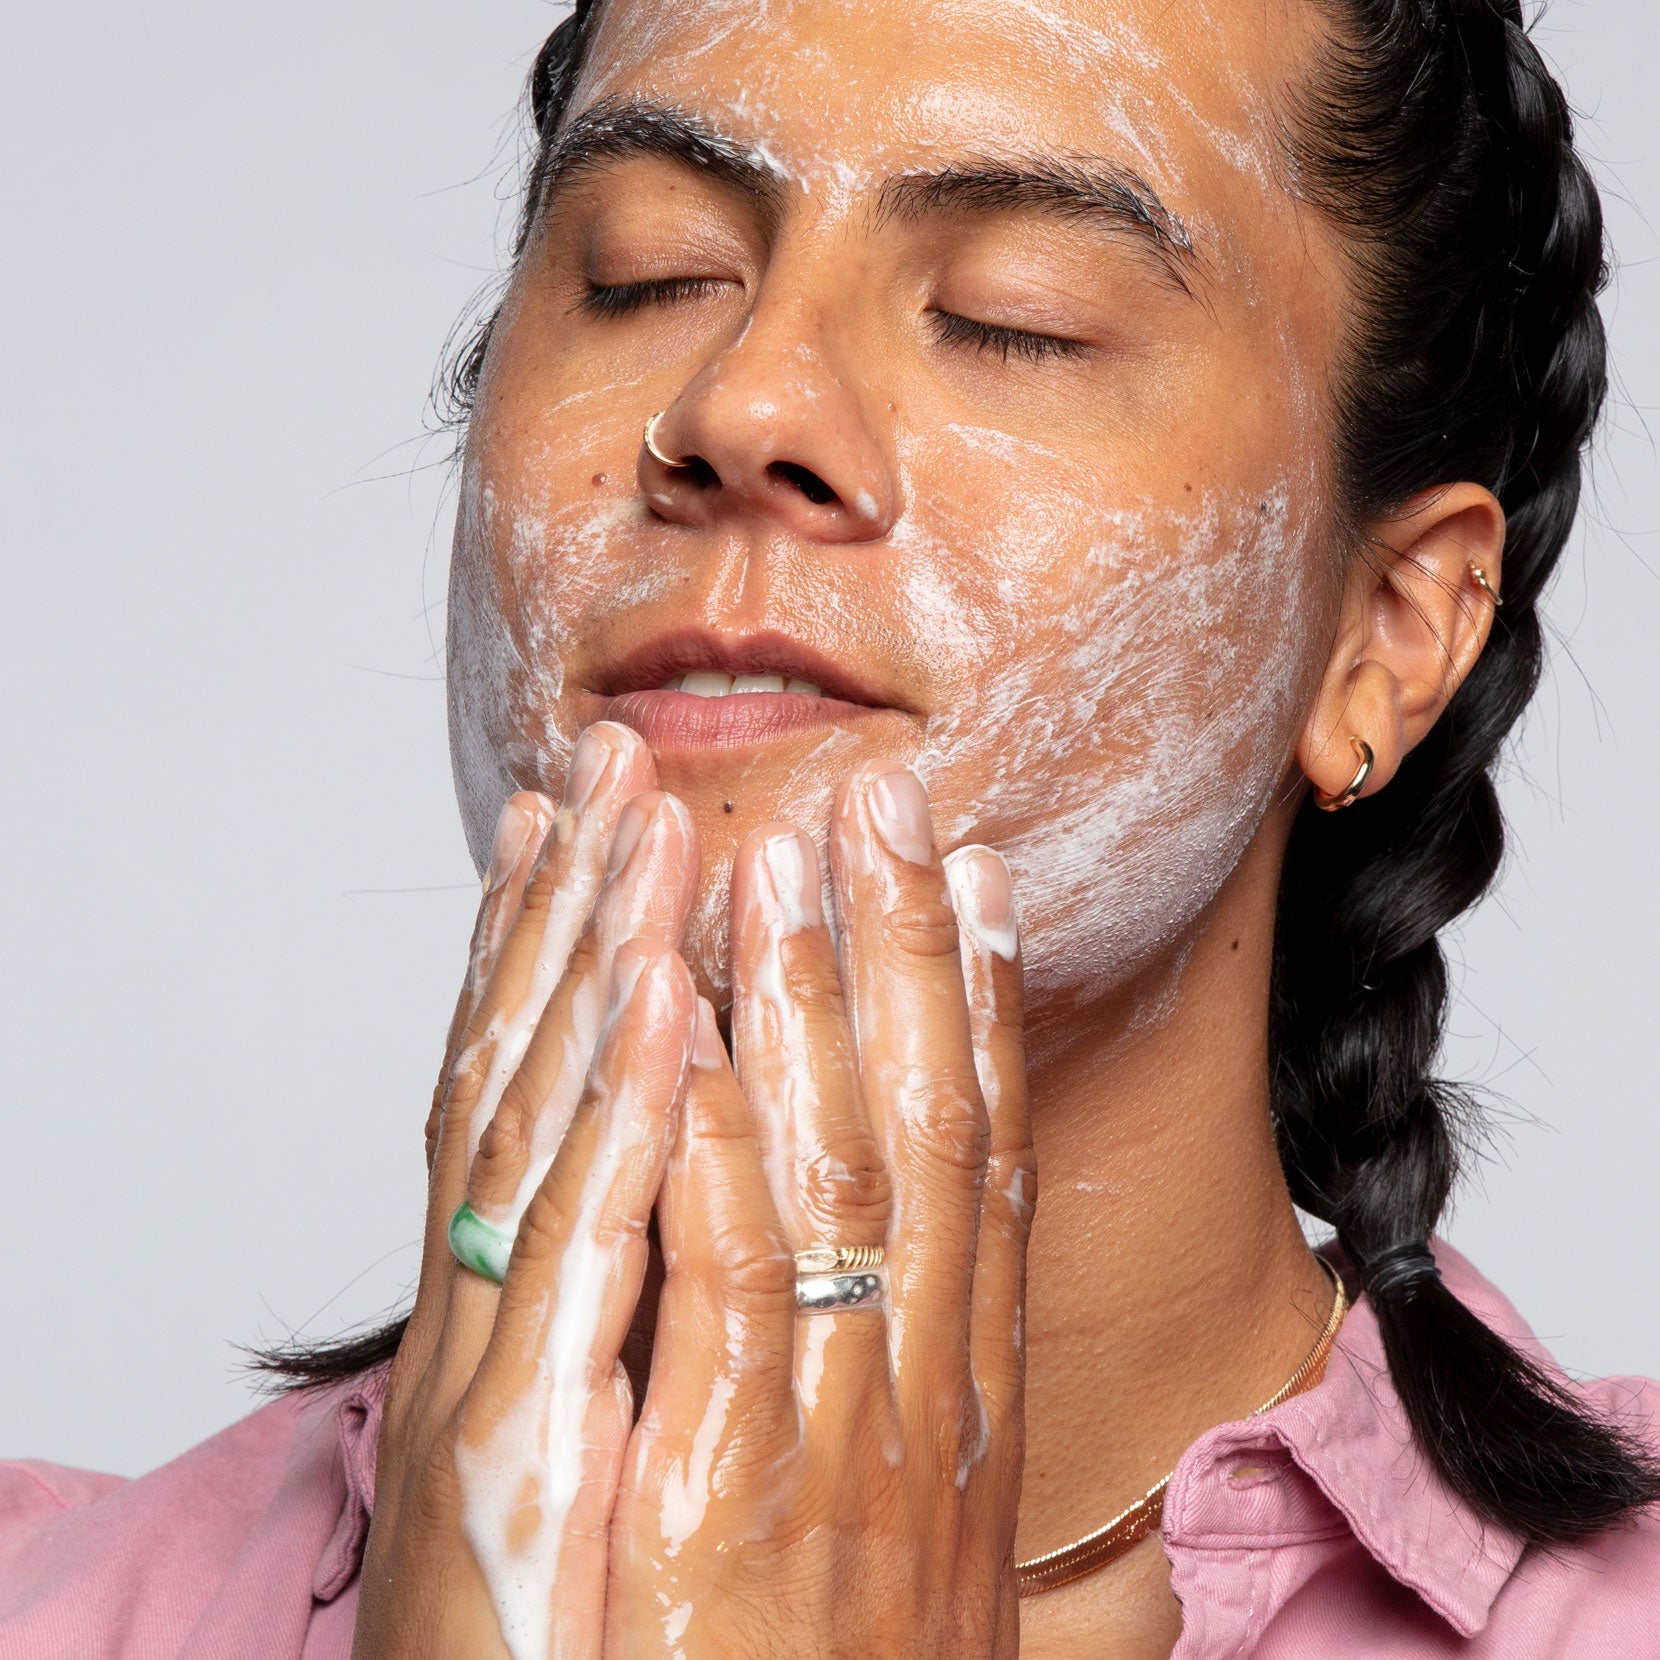 Image of a model applying the Clearly Pink Clarifying Cleanser to his face. The model’s eyes are closed and the content is around his hands, cheeks, and forehead. Due to the consistency of the cleanser there are bubbles from the products that are lathered on his face and hands.